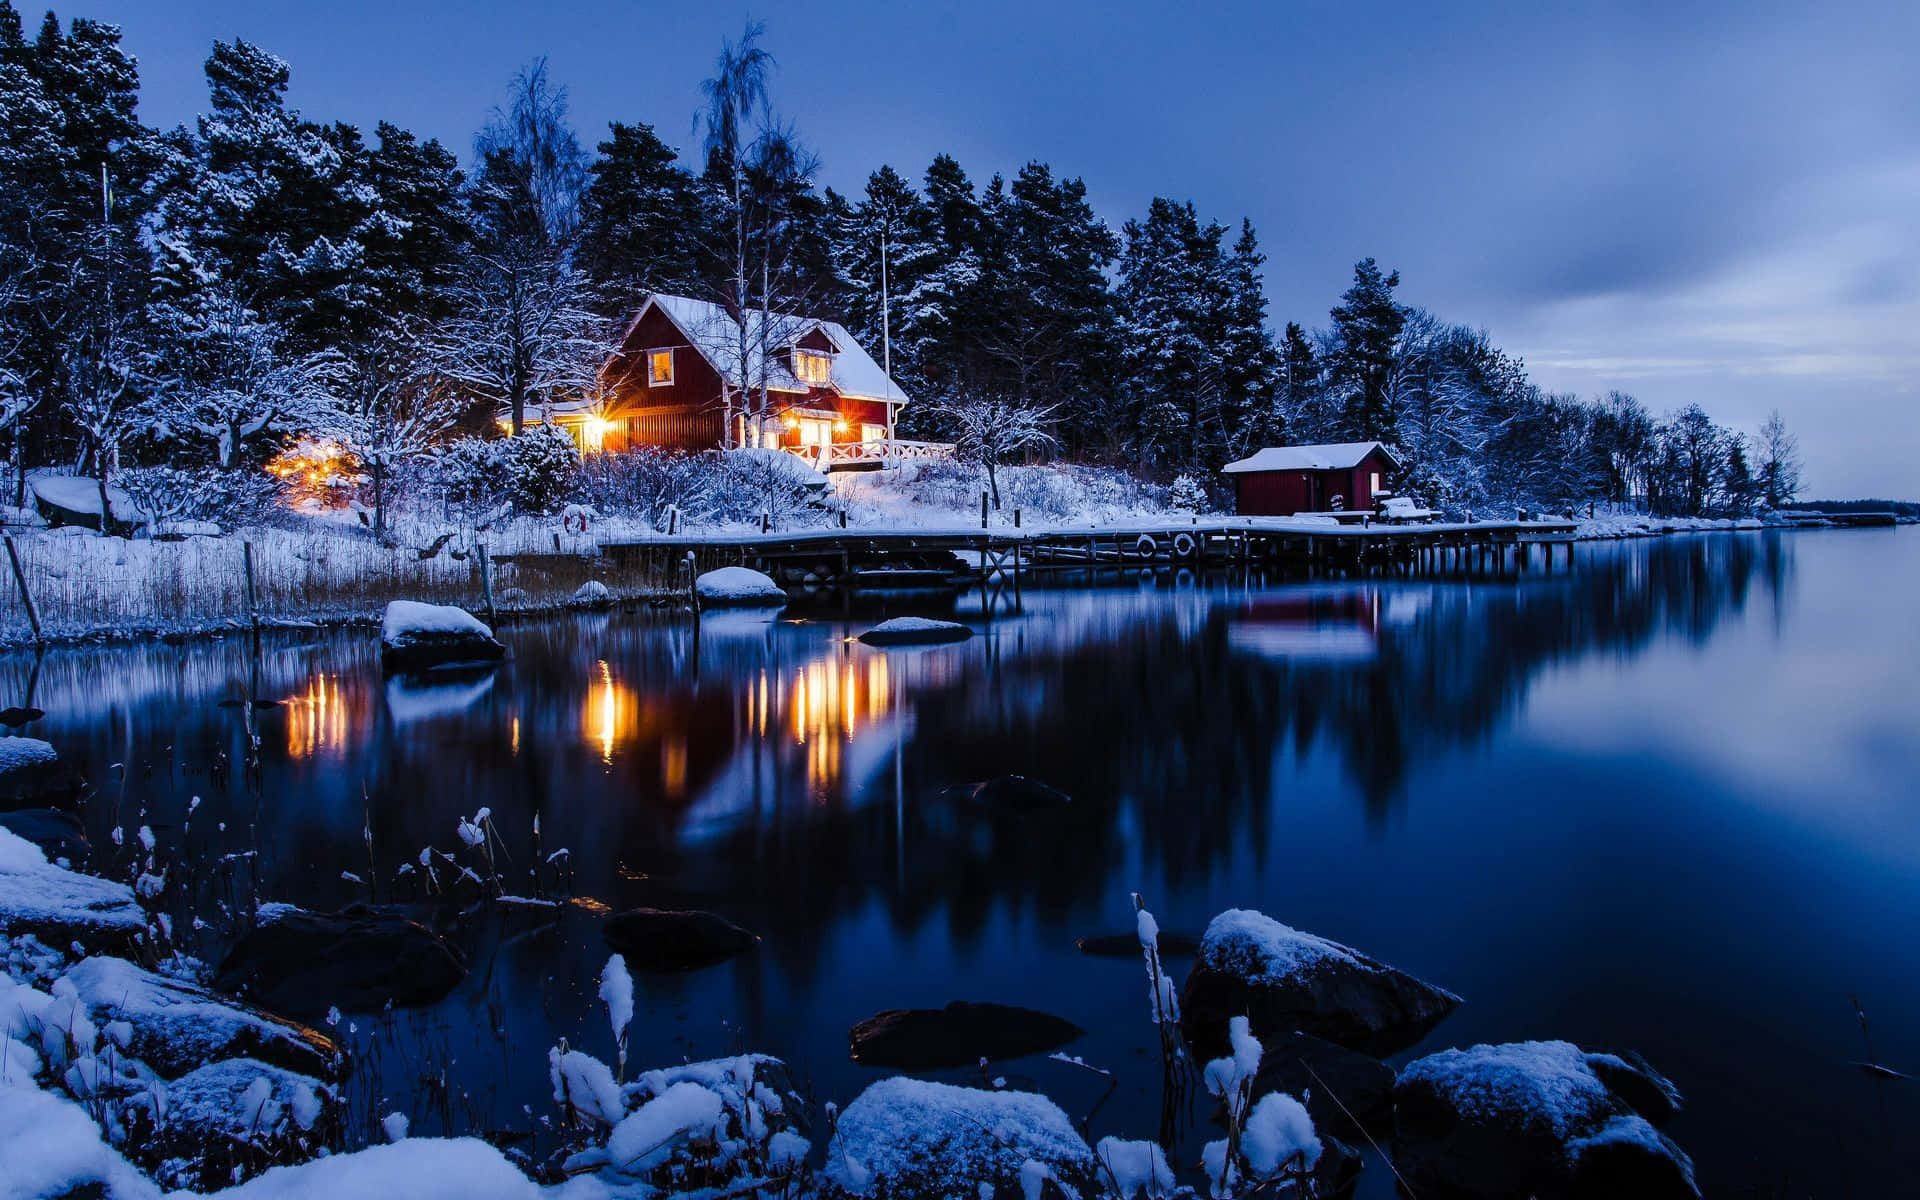 Enjoy a soothing winter landscape in all its beauty